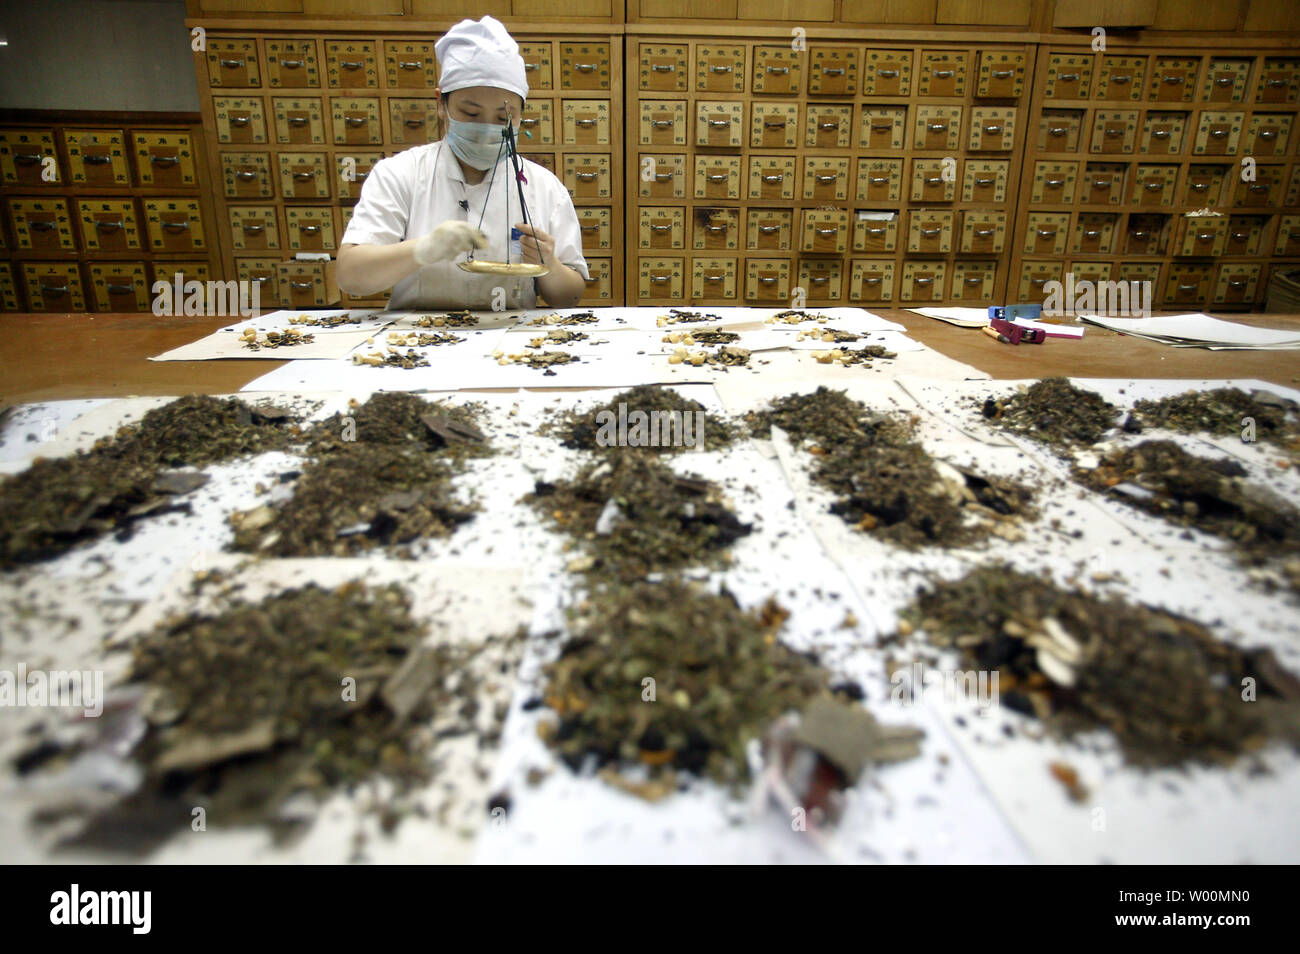 Chinese pharmacy workers prepare traditional Chinese medicine (TCM) packets  of various herbs at the Beijing Traditional Chinese Medicine Hospital in  Beijing on July 23, 2009. In order to bring TCM into full